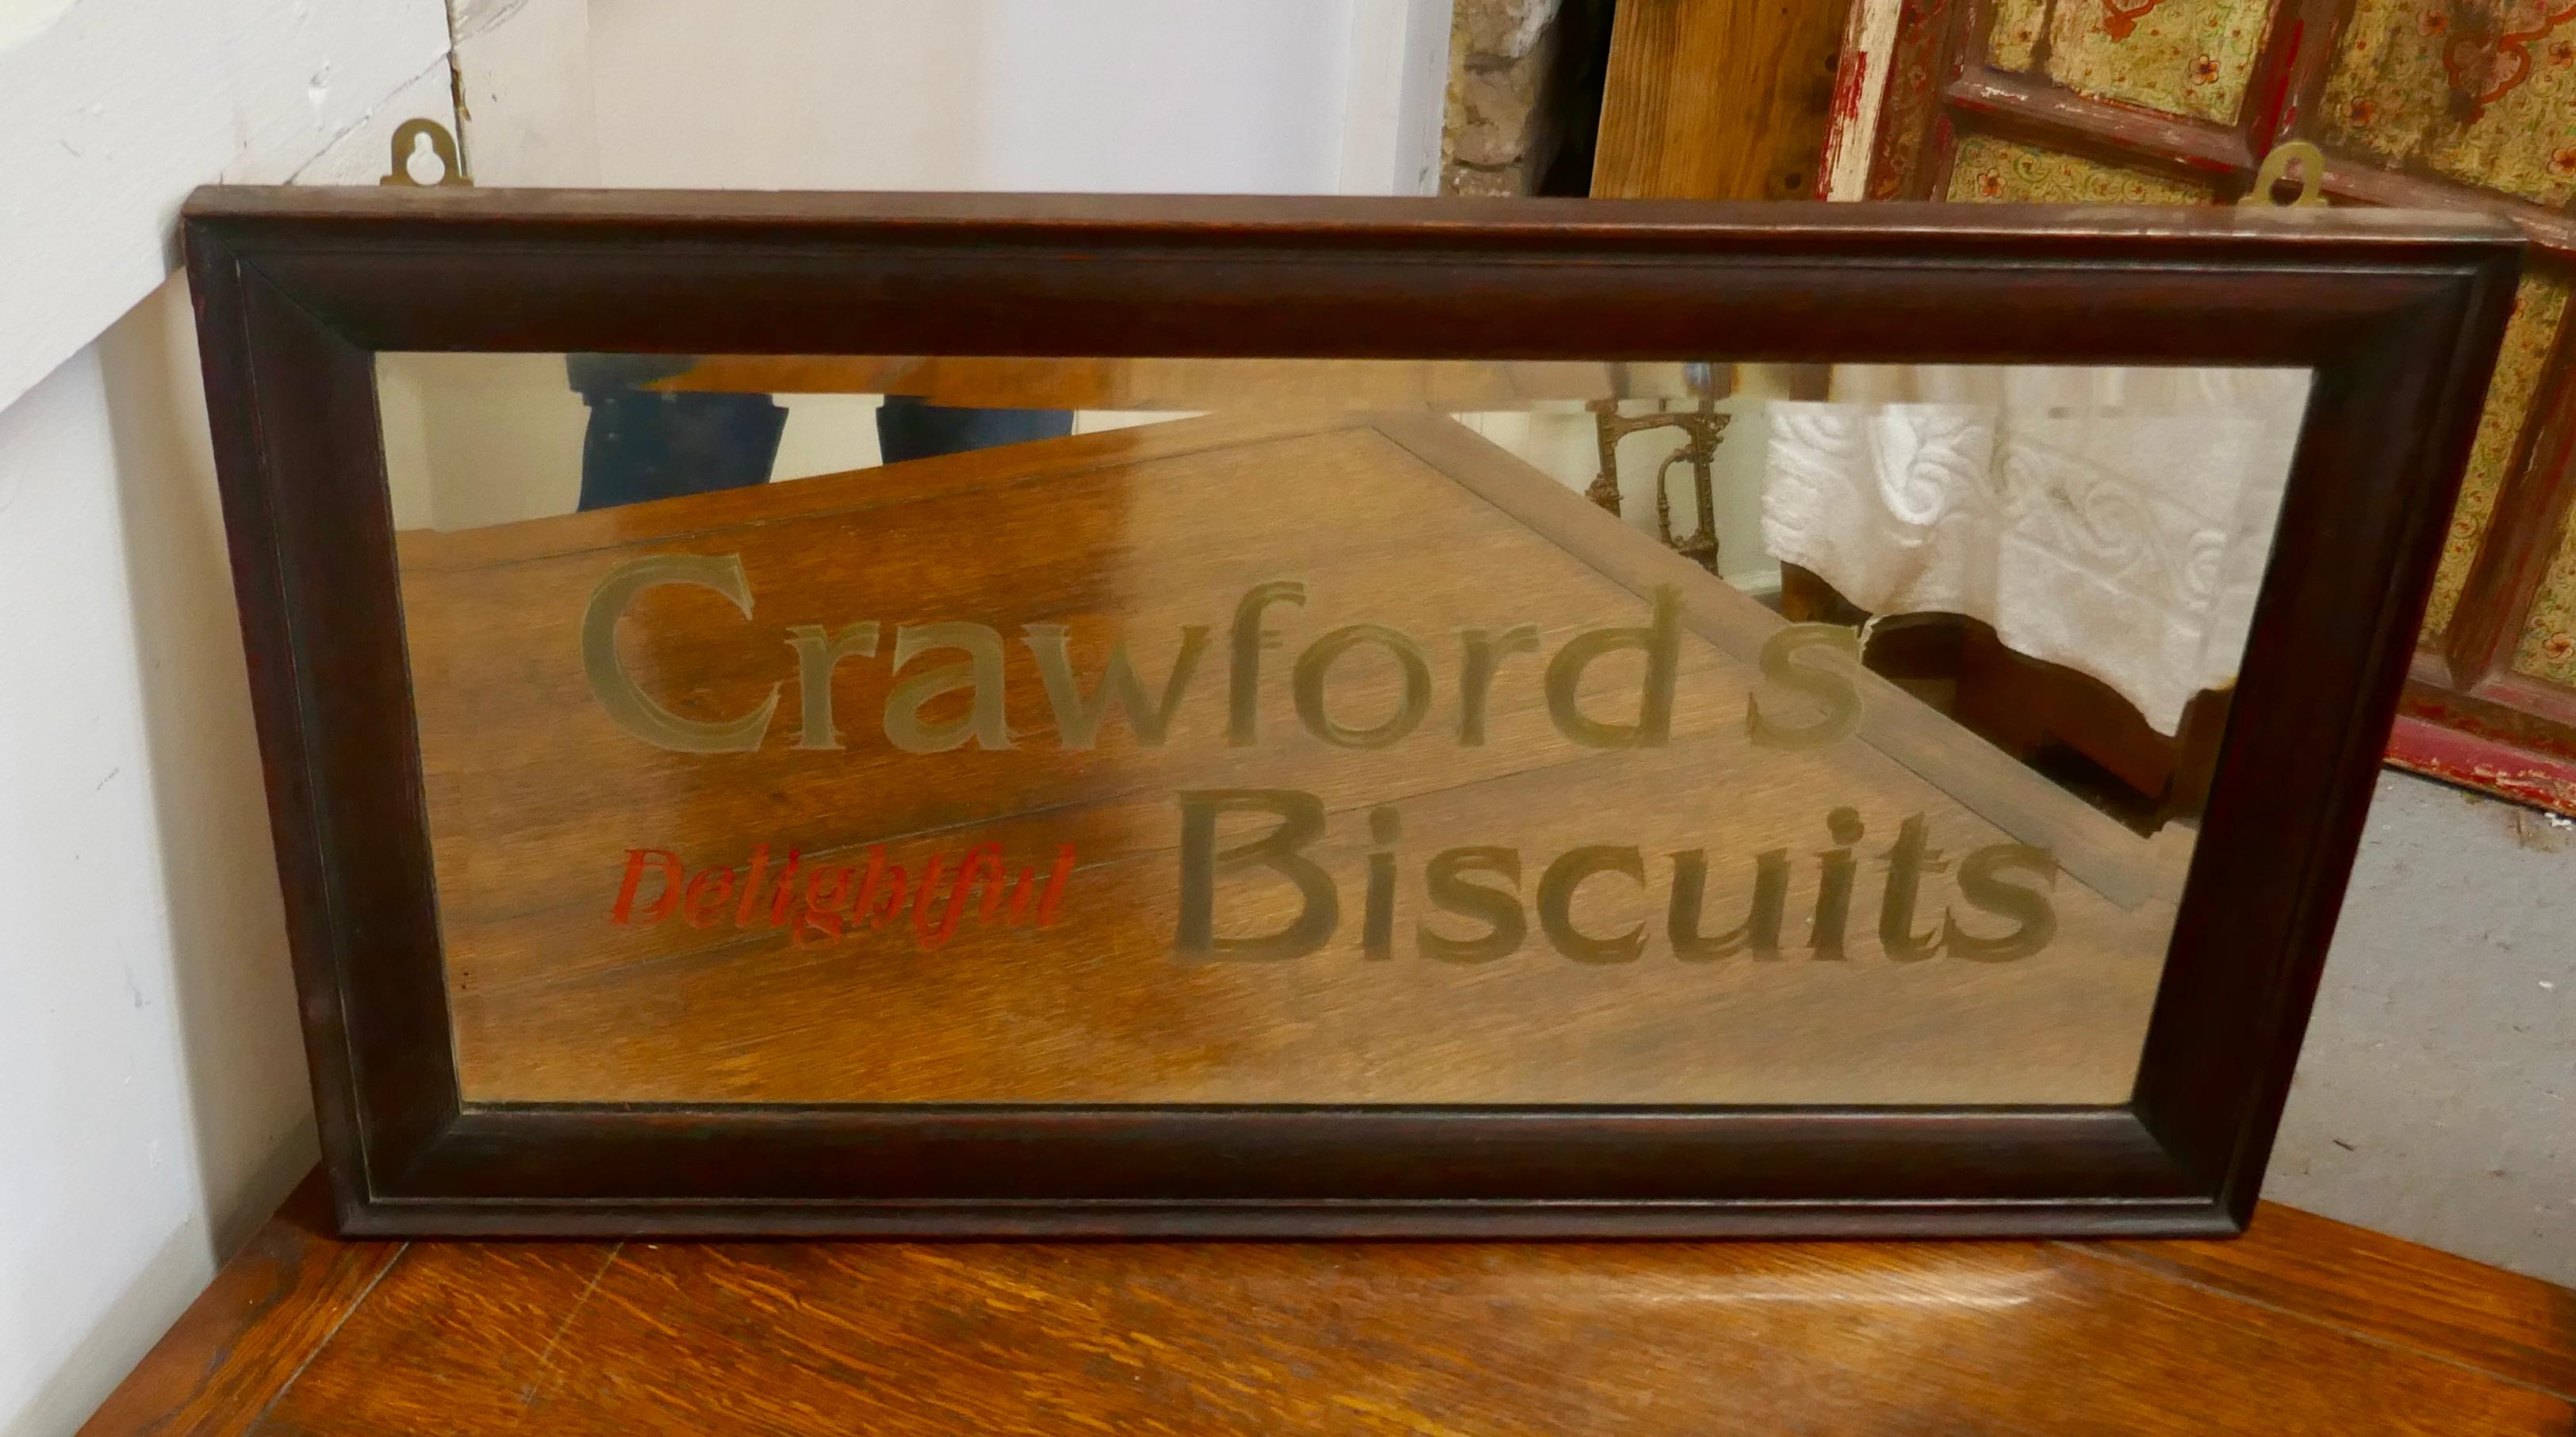 “Crawford’s Delightful Biscuits” Baker/Cafe Advertising Mirror In Good Condition For Sale In Chillerton, Isle of Wight